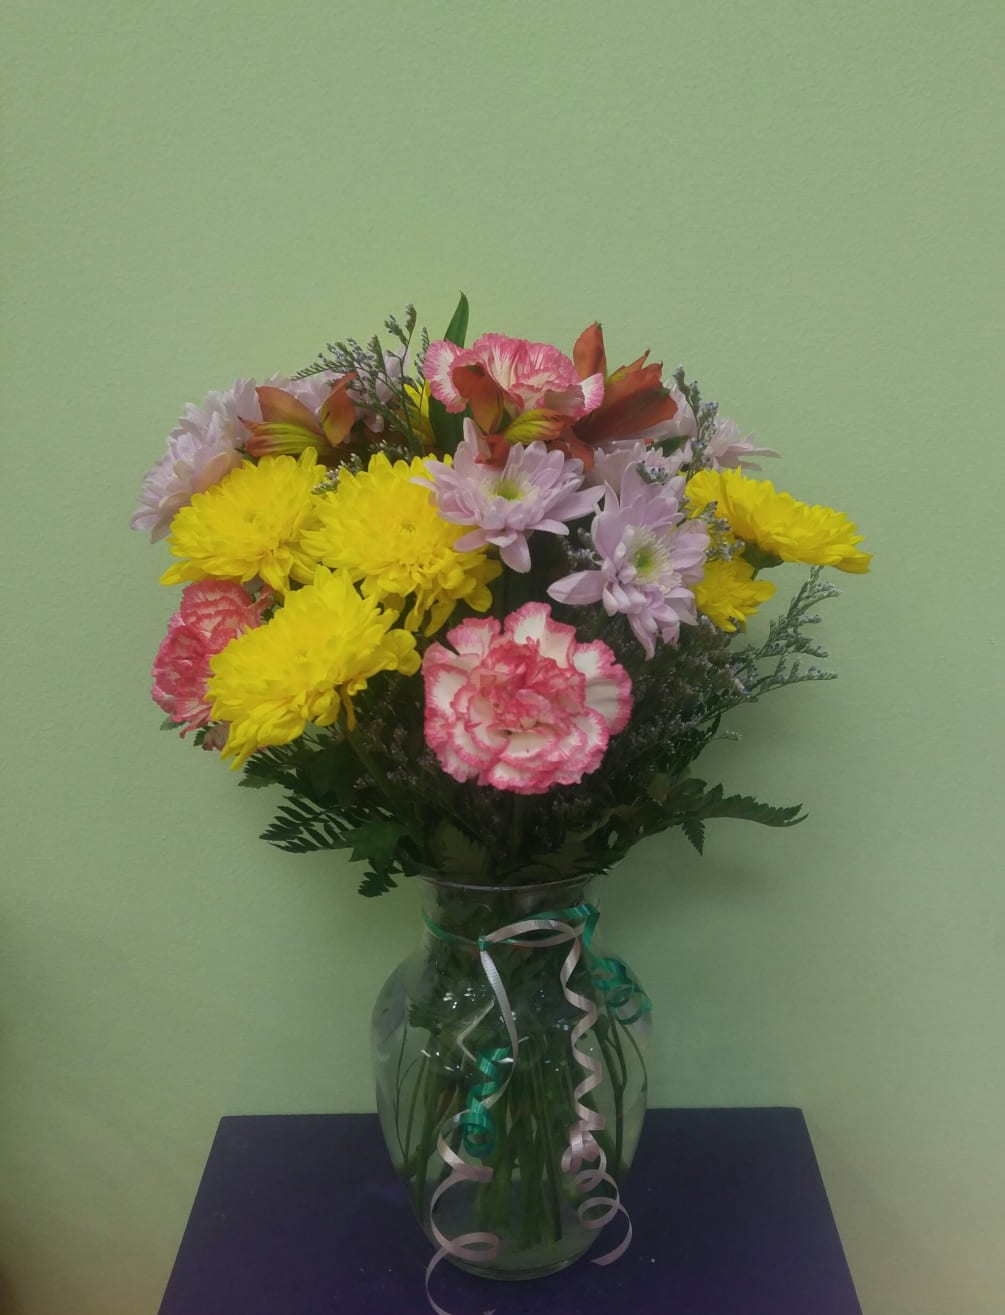 This happy arrangement has great color and long lasting flowers that will